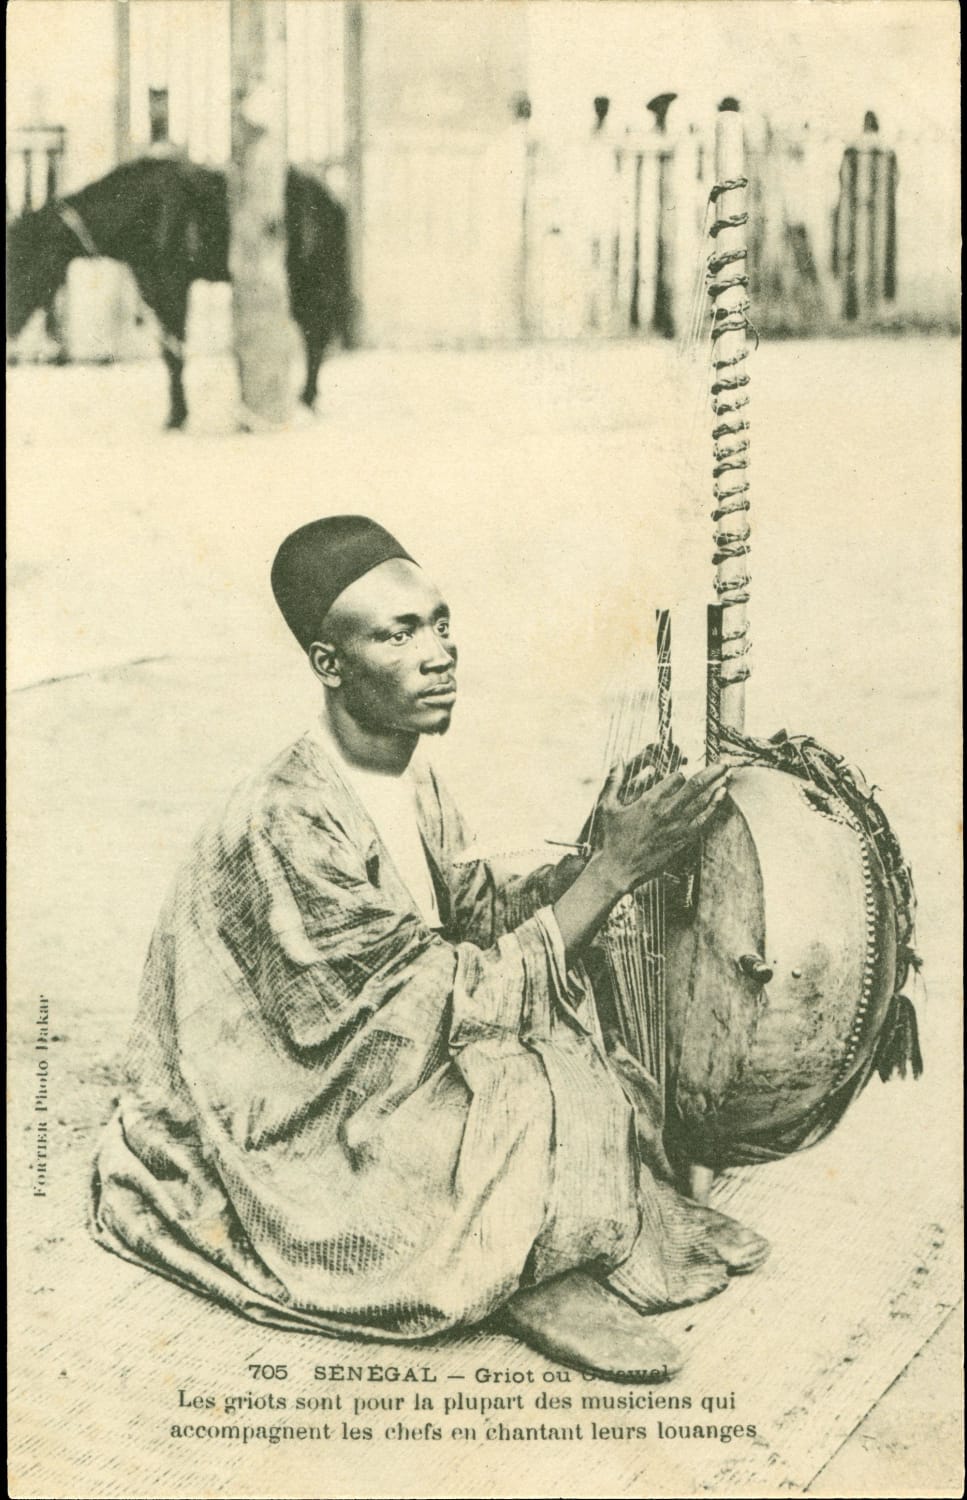 A griot (musician and story-teller) with his kora (calabash harp) (Senegal c1904)